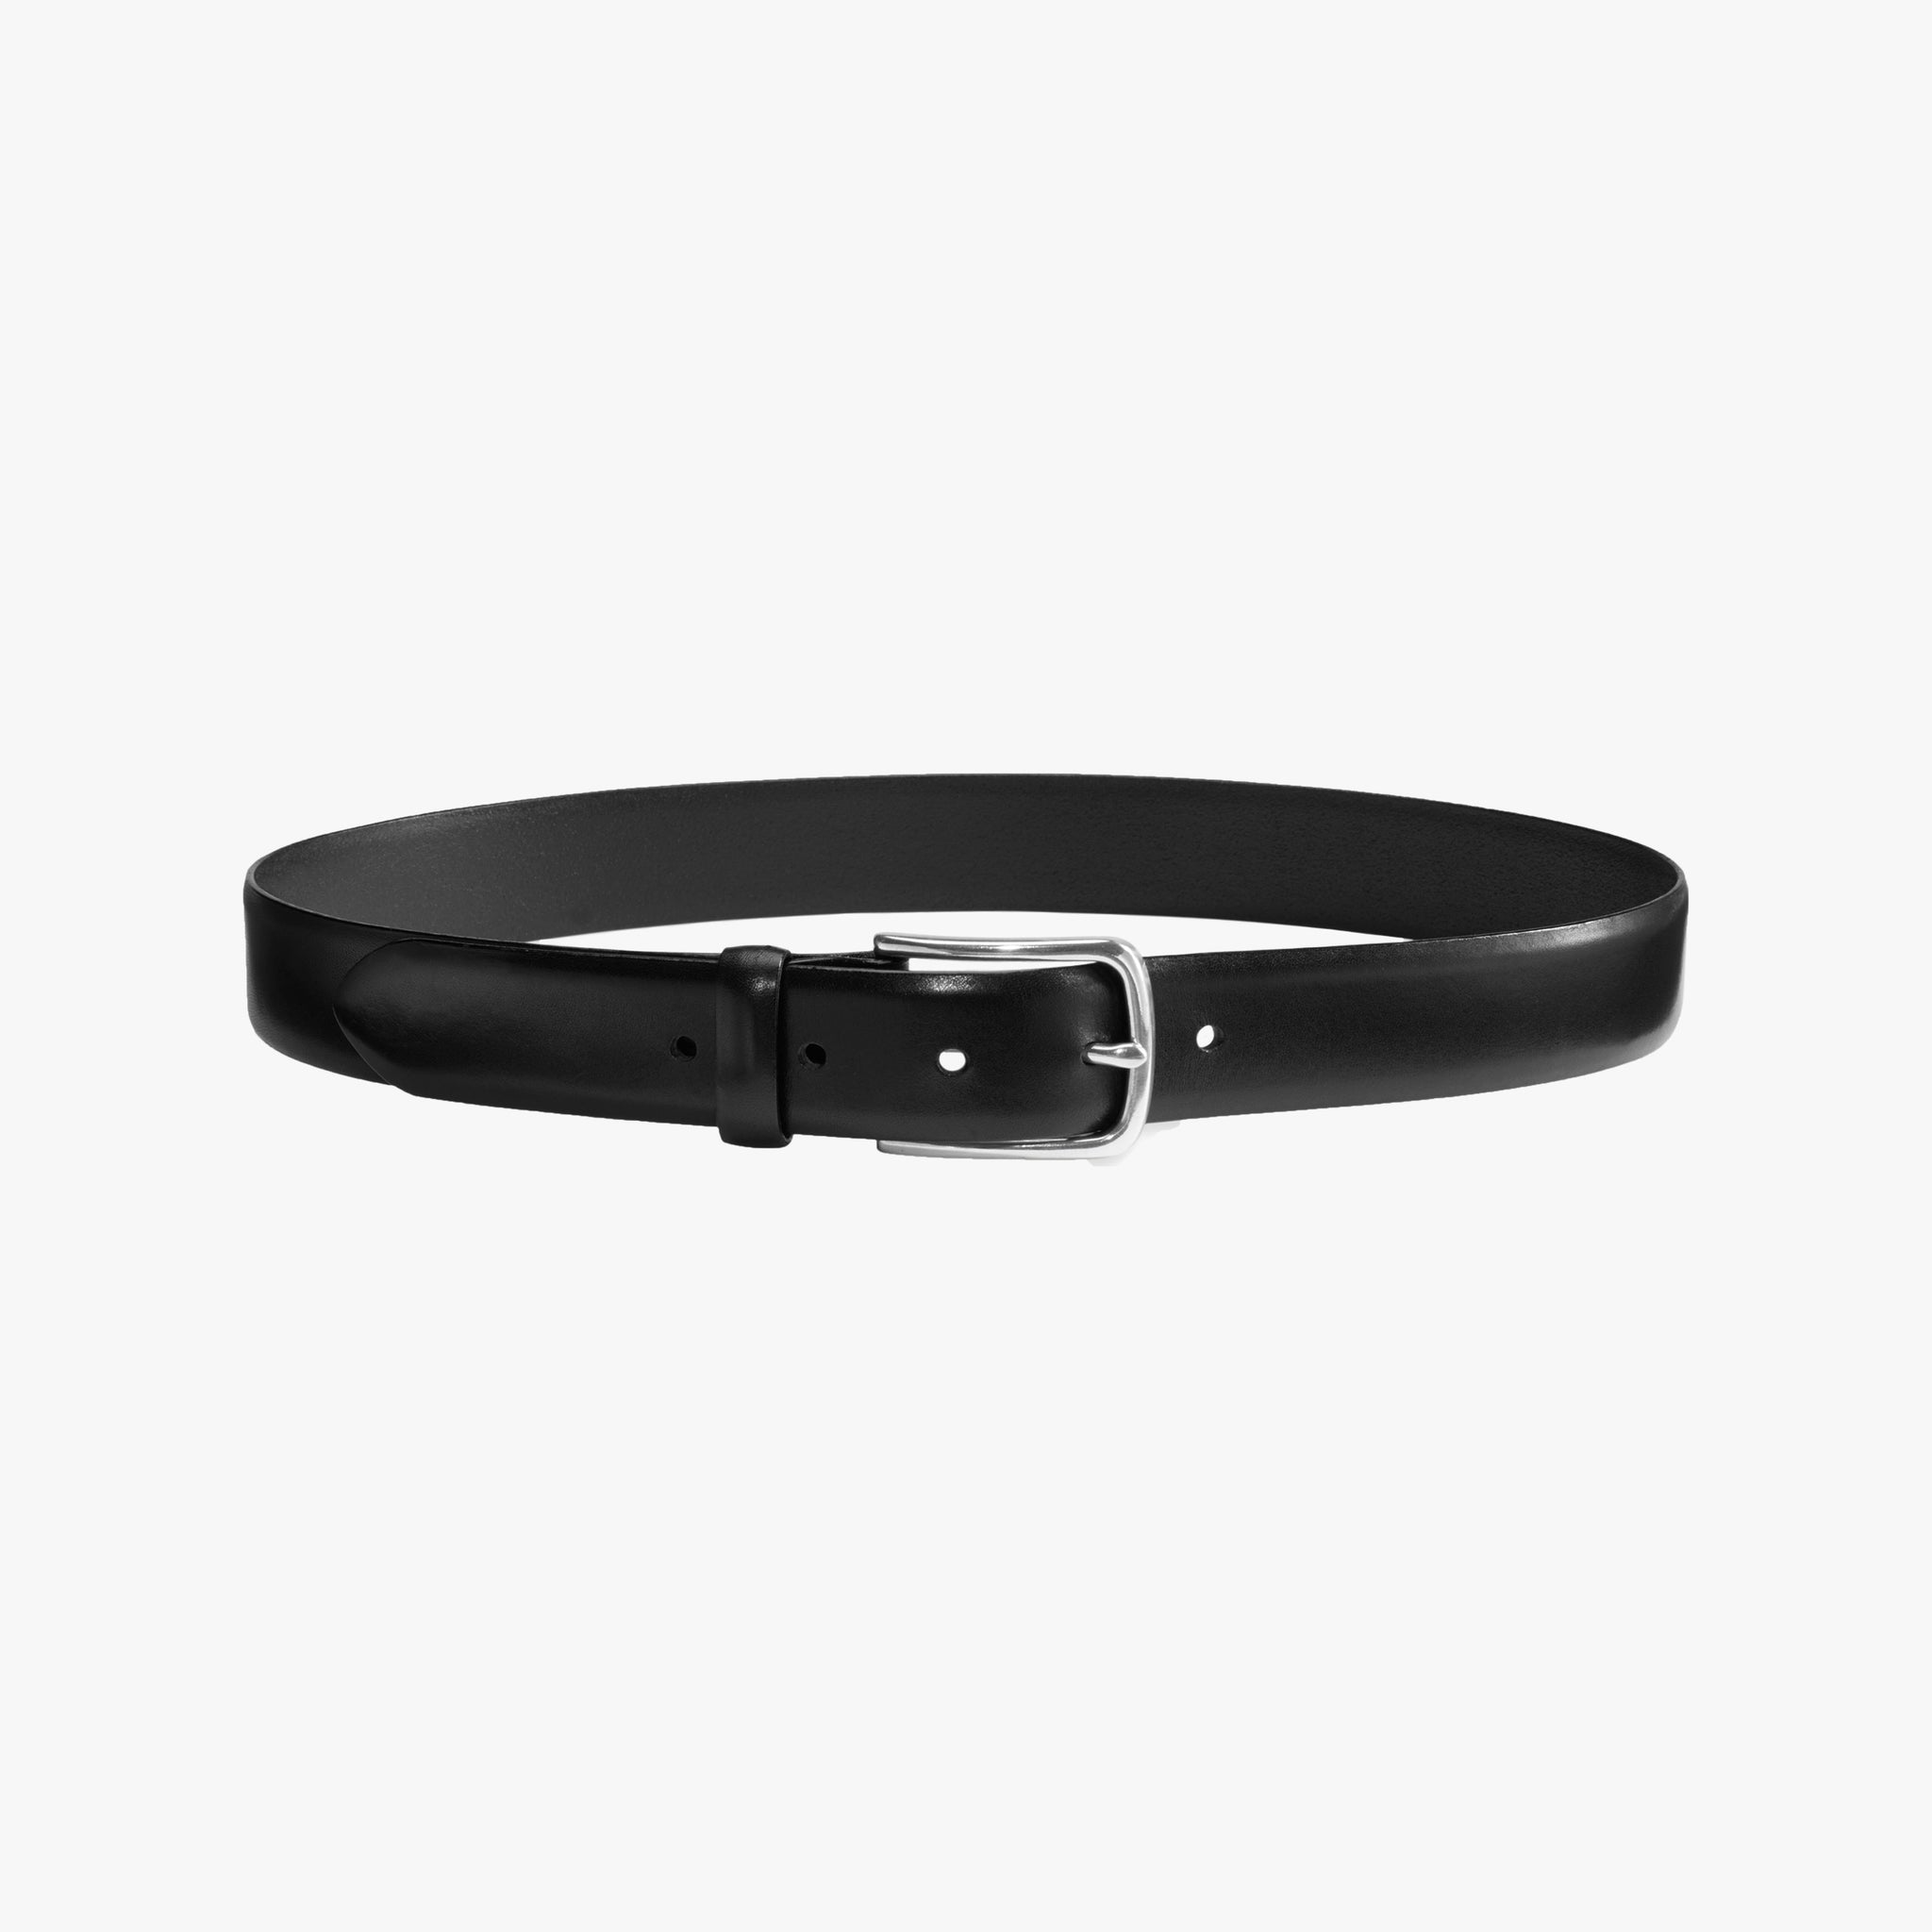  LANMU Replacement Belts Compatible with Black and